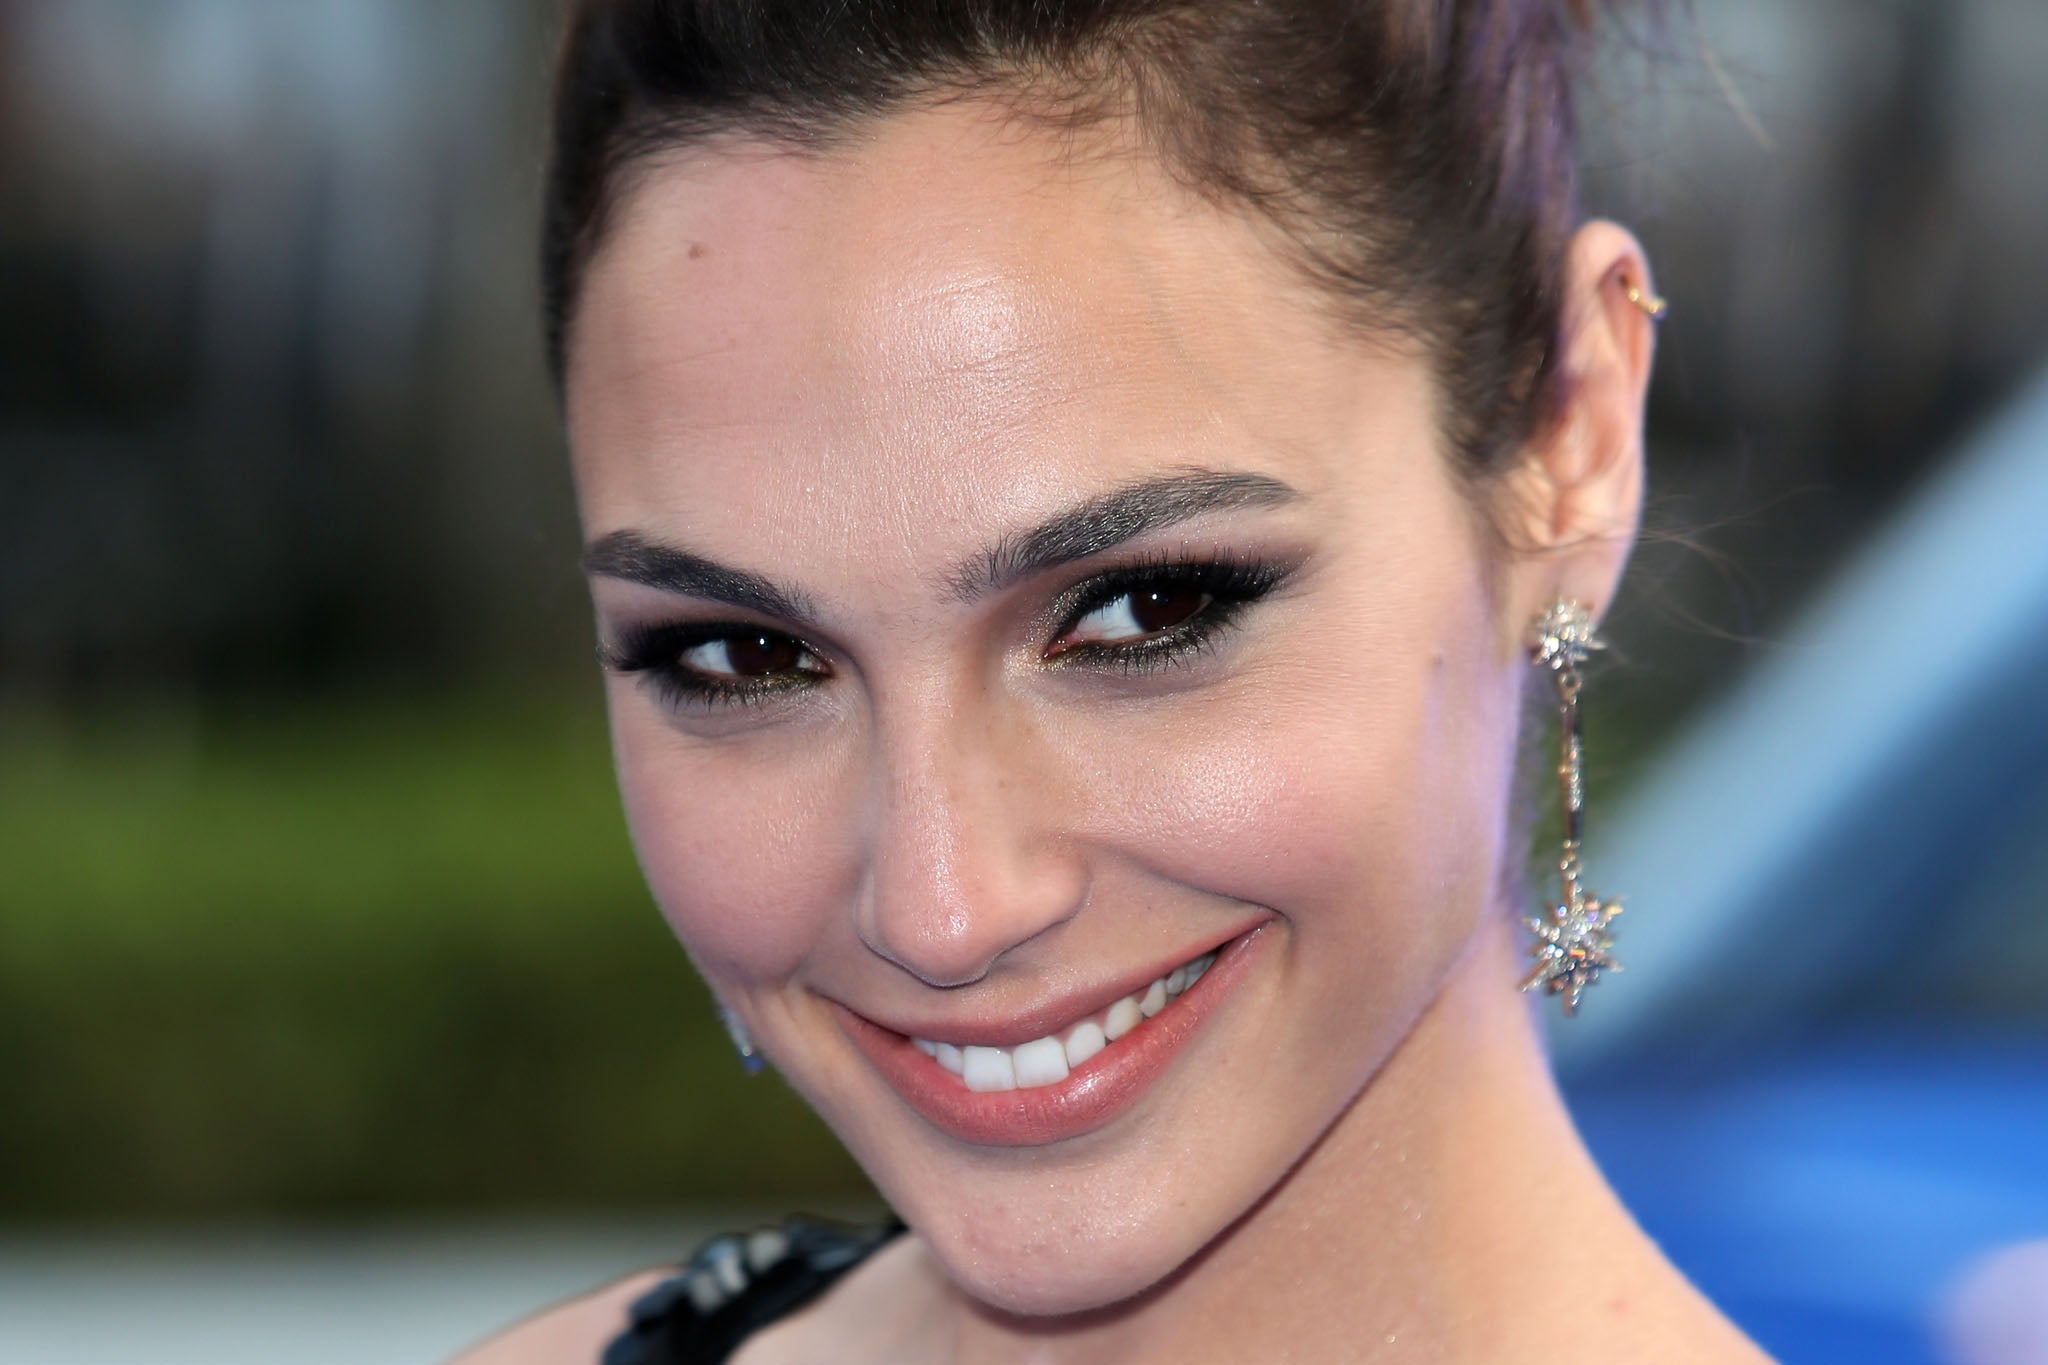 Israeli-born actress Gal Gadot is set to play Esther, the slave who Ben-Hur falls in love with